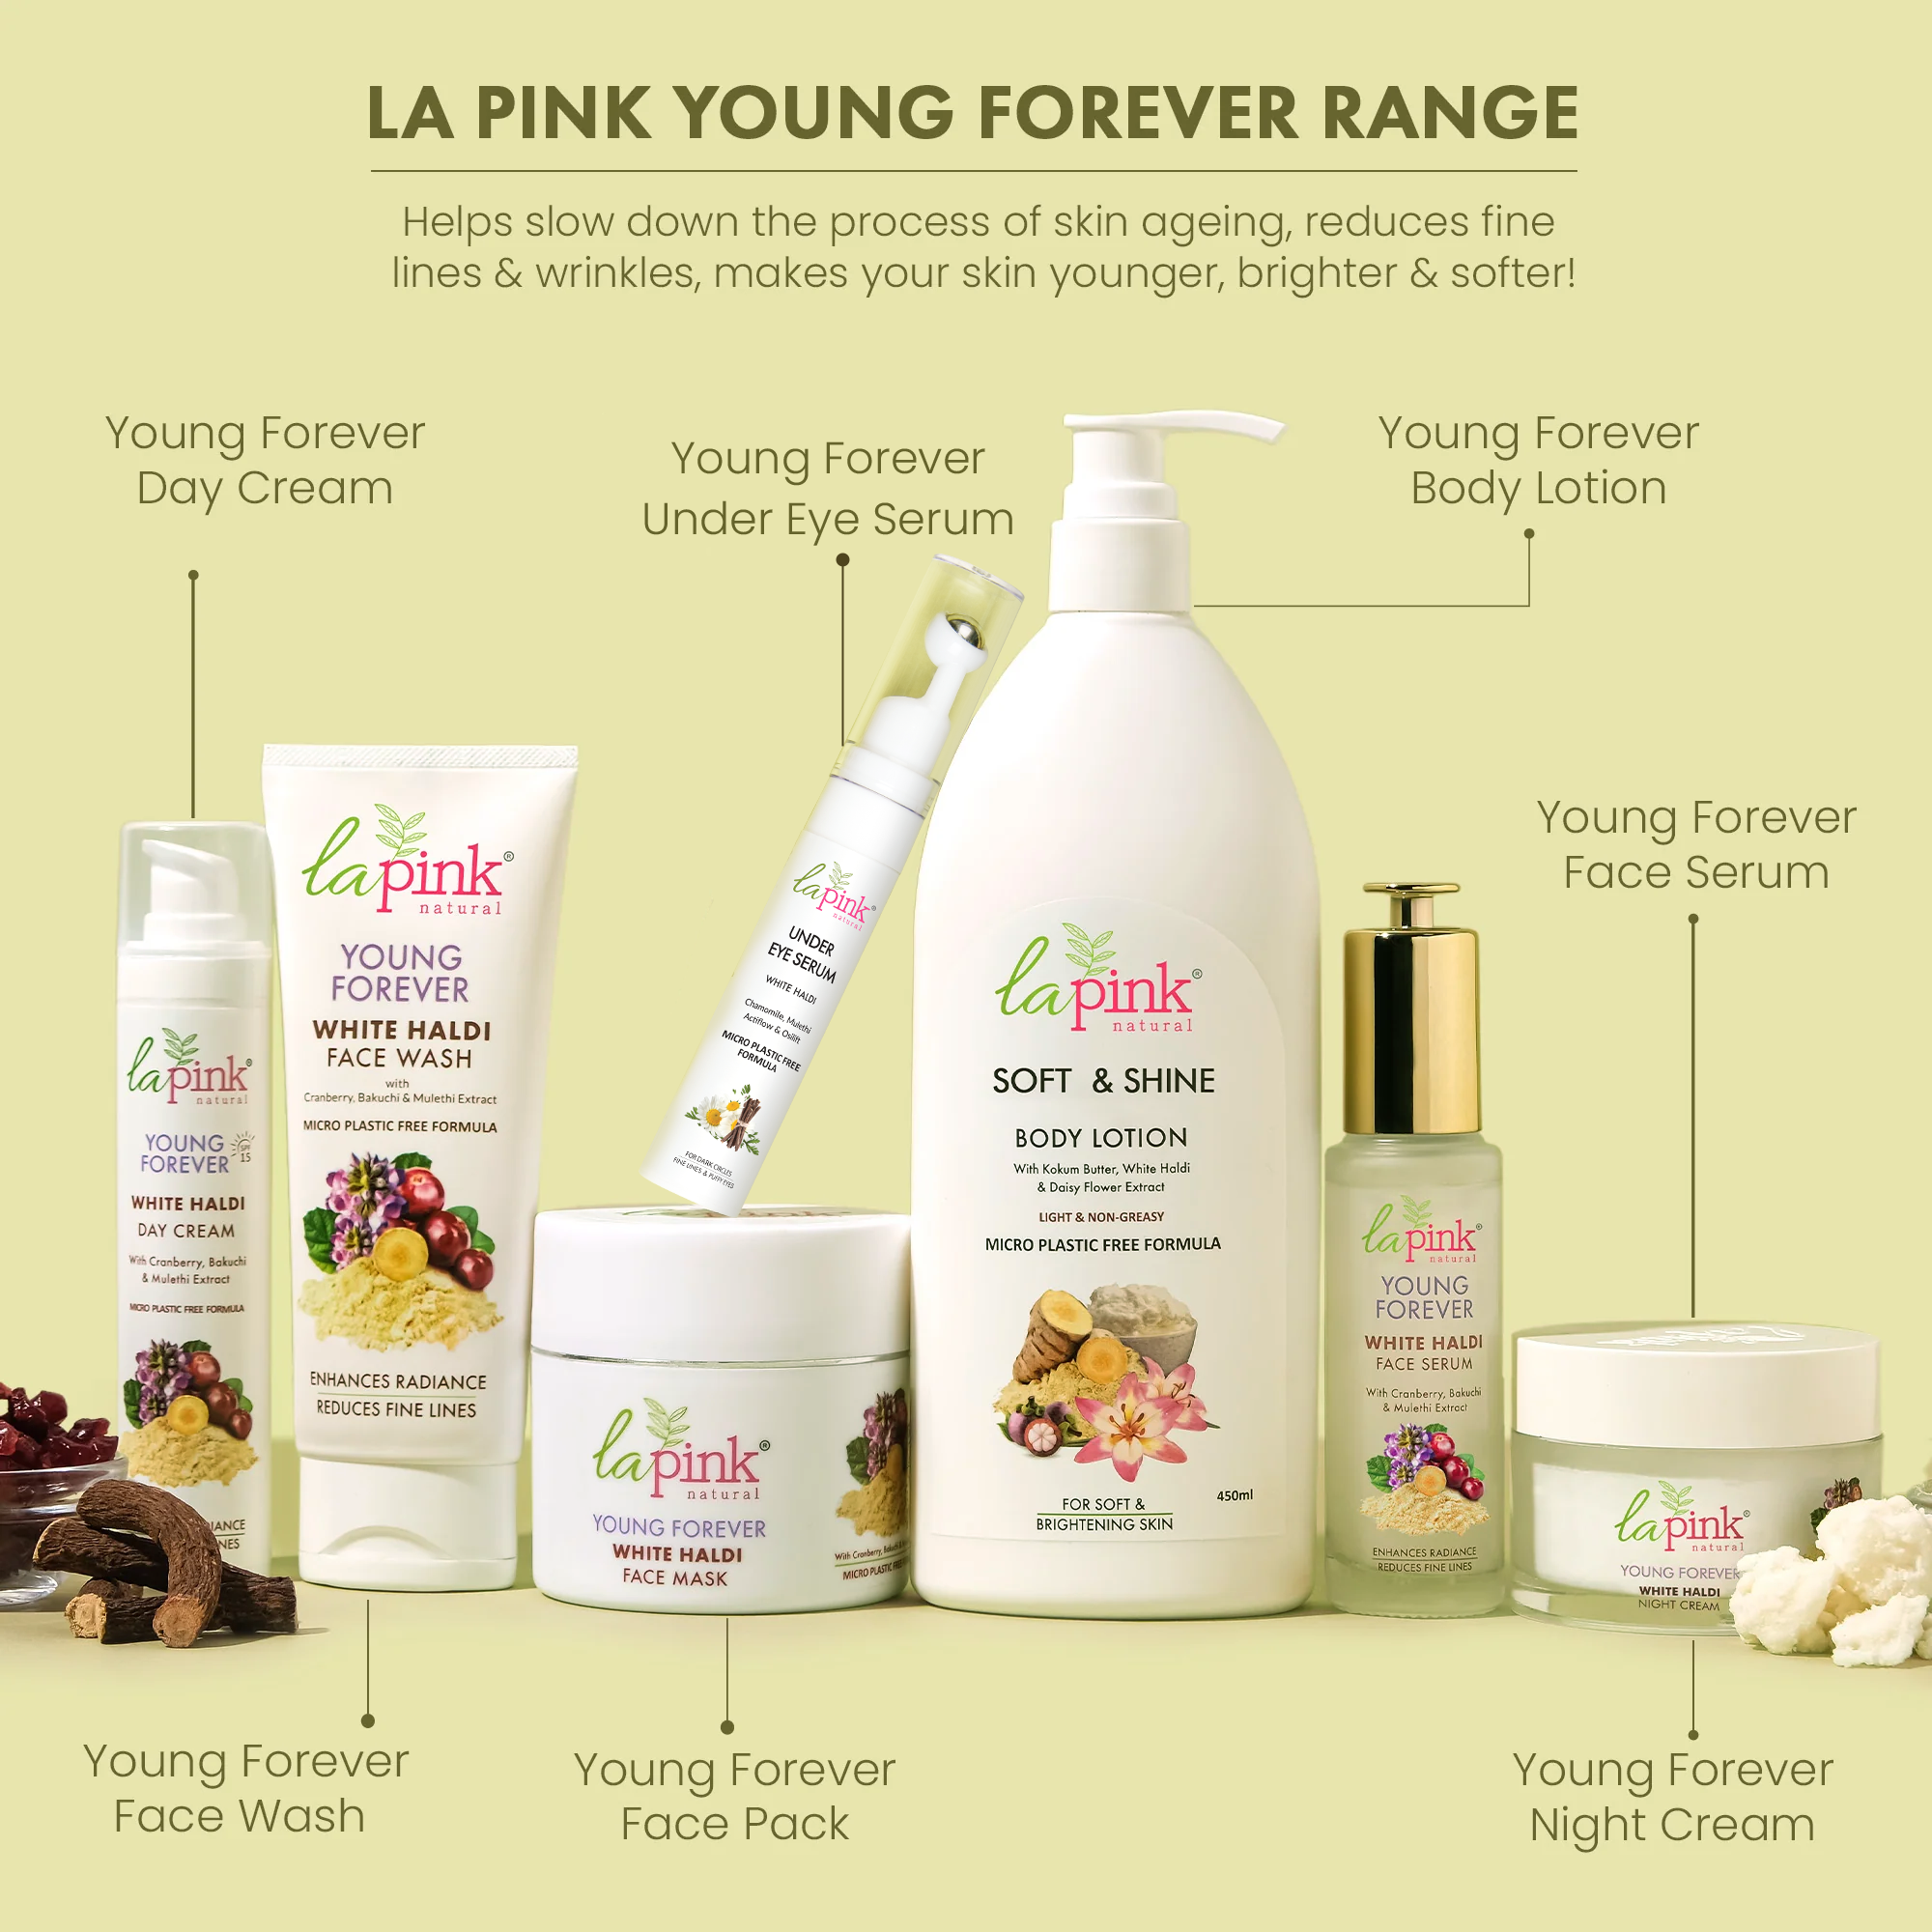 Young Forever Face Wash 25 ml